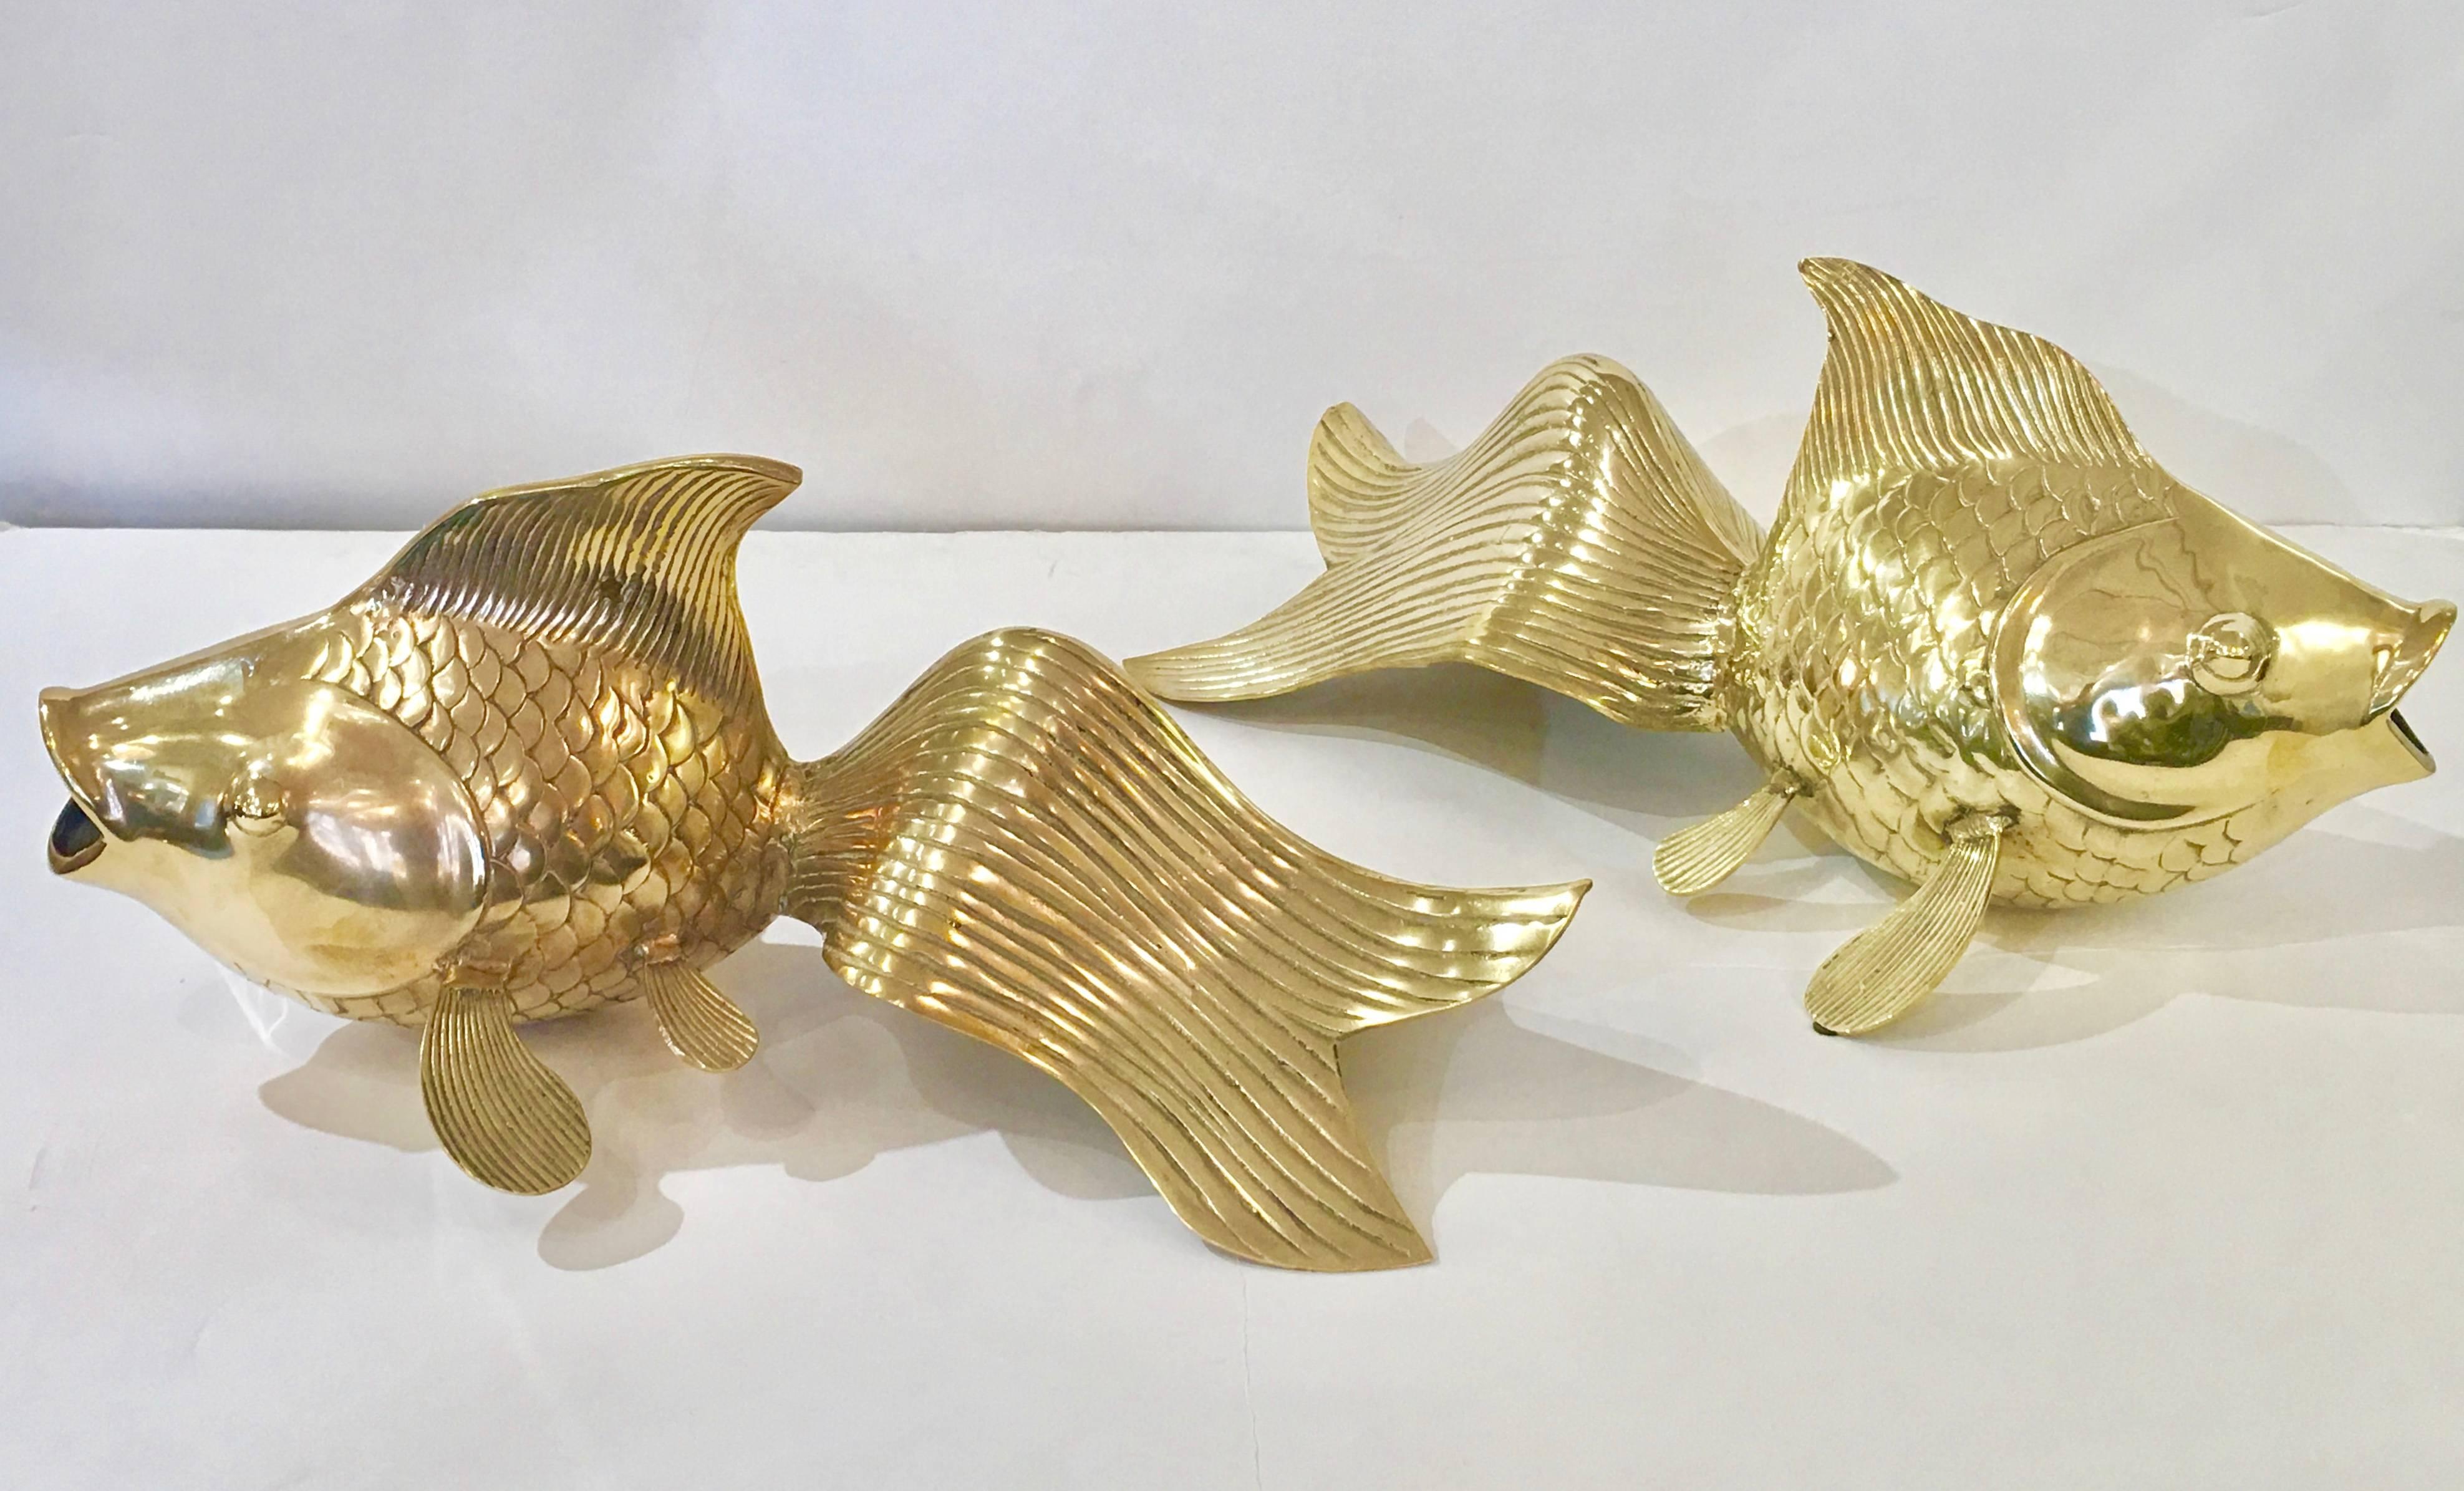 Extraordinary pair of sculptural brass koi, or gold fish by Rosenthal. This is a rare pair. The scale is monumental. Magnificent! Please contact for location. Offered by Las Venus by Kenneth Clark, New York City.